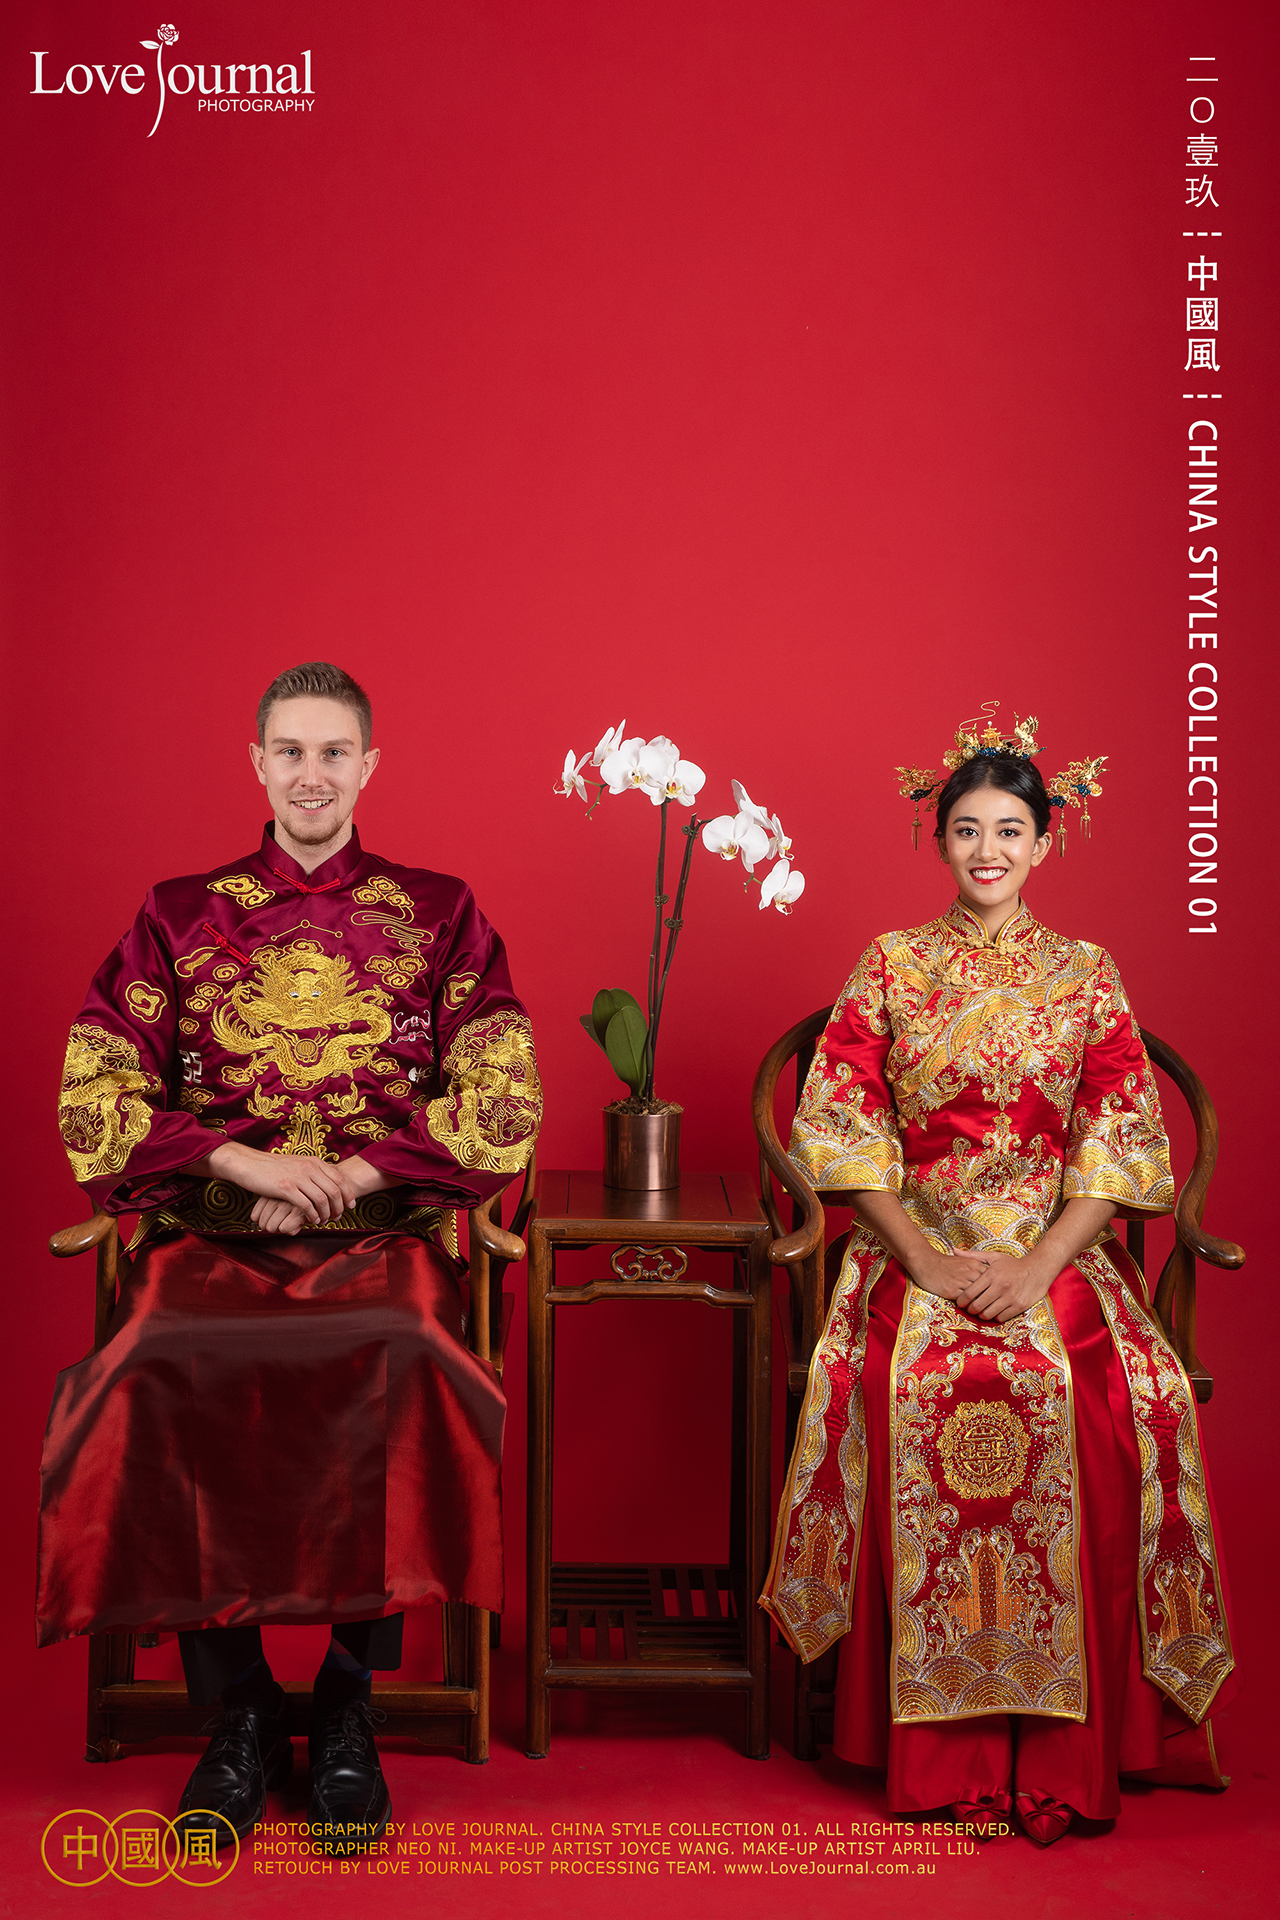 Love Journal Photography, Chinese Style Pre-Wedding Photography in Studio